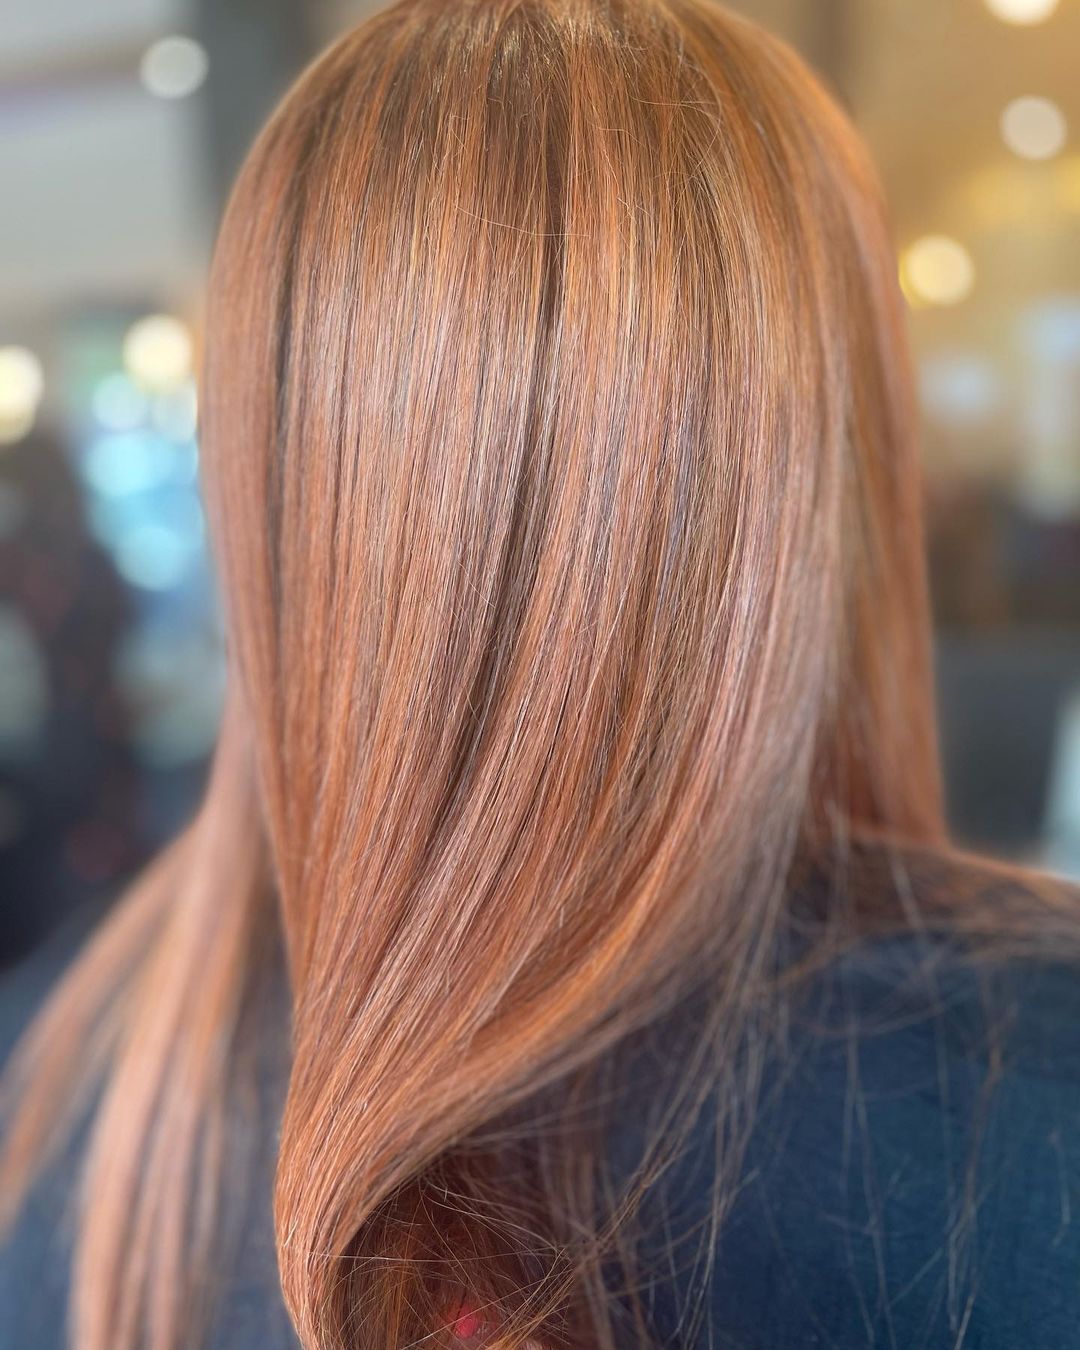 RED HAIR COLOUR SPECIALISTS NEAR ME